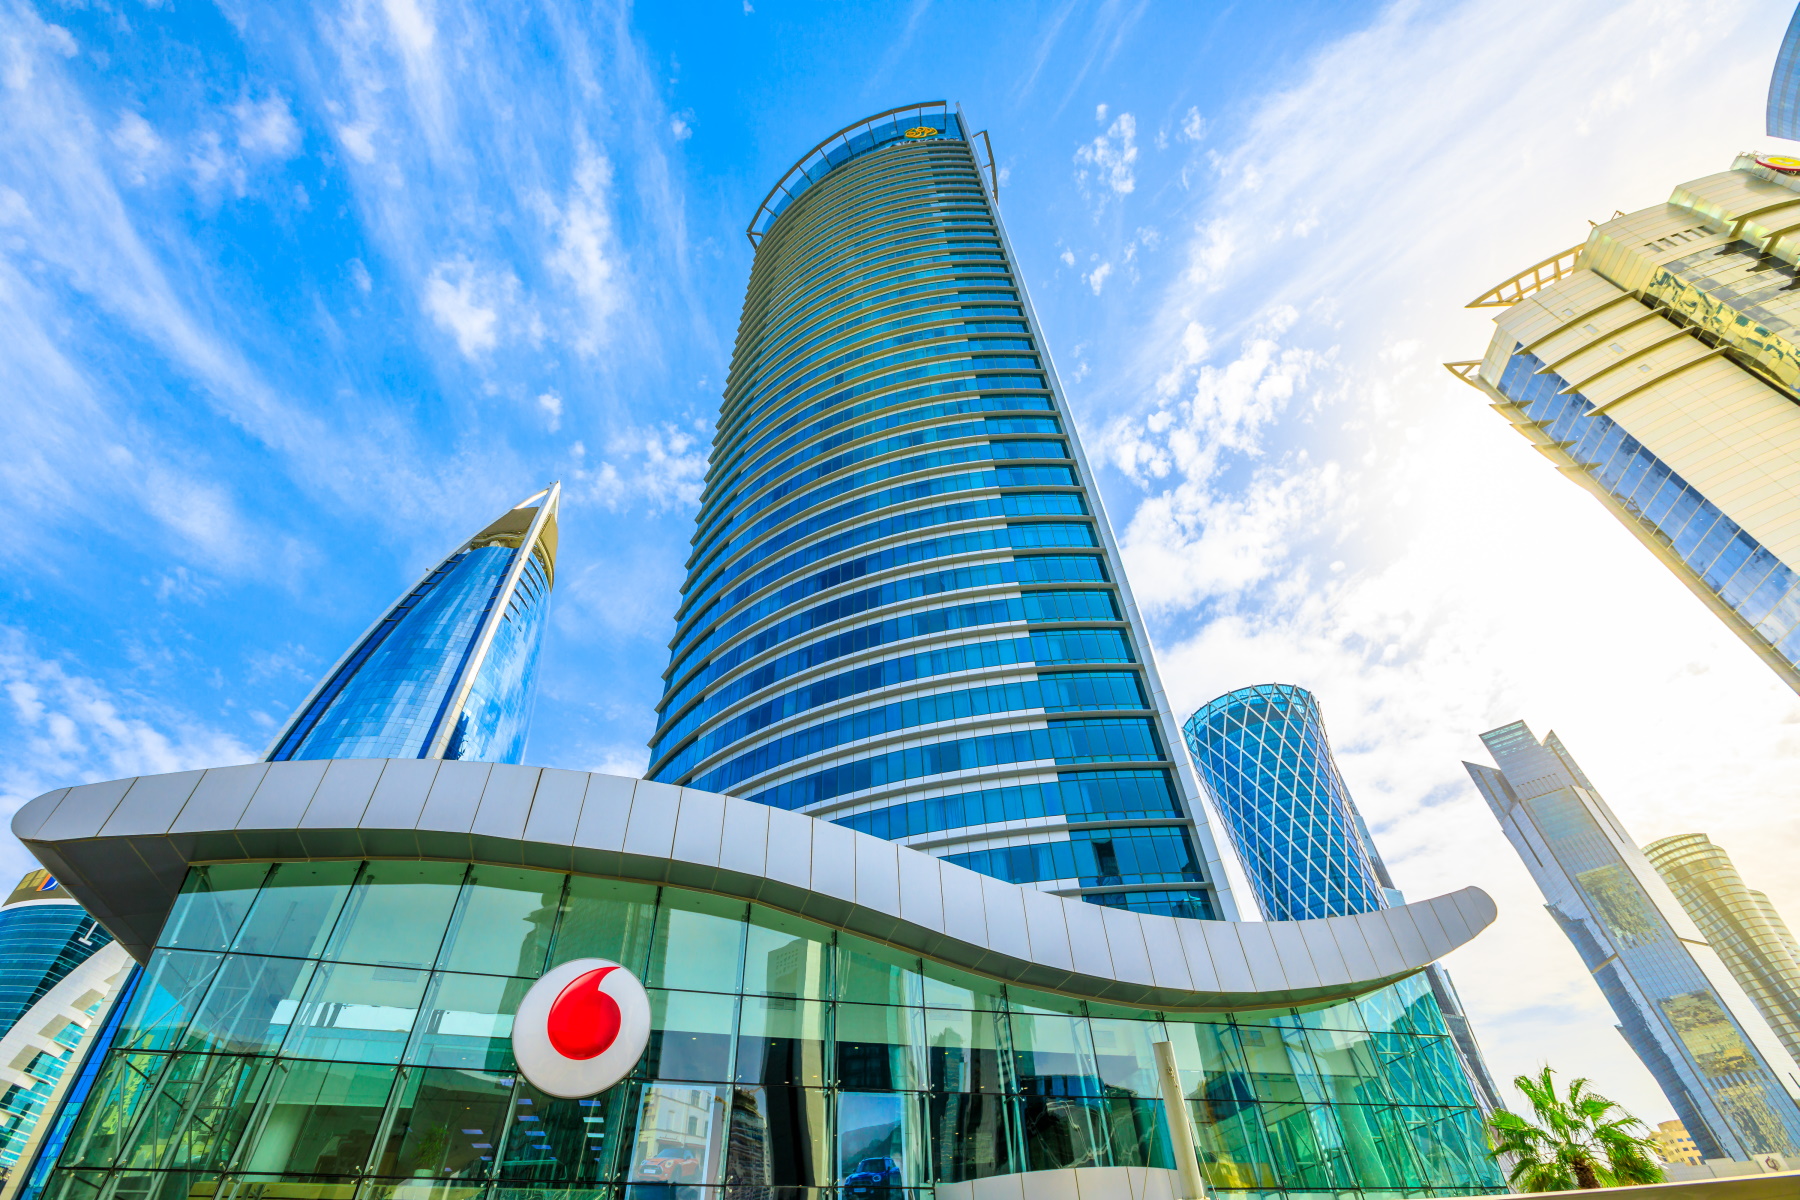 When Vodafone Qatar moved to its new, state-of-the-art HQ building, there was a need for an advanced digital solution that could enhance security and convenience for visitors and employees